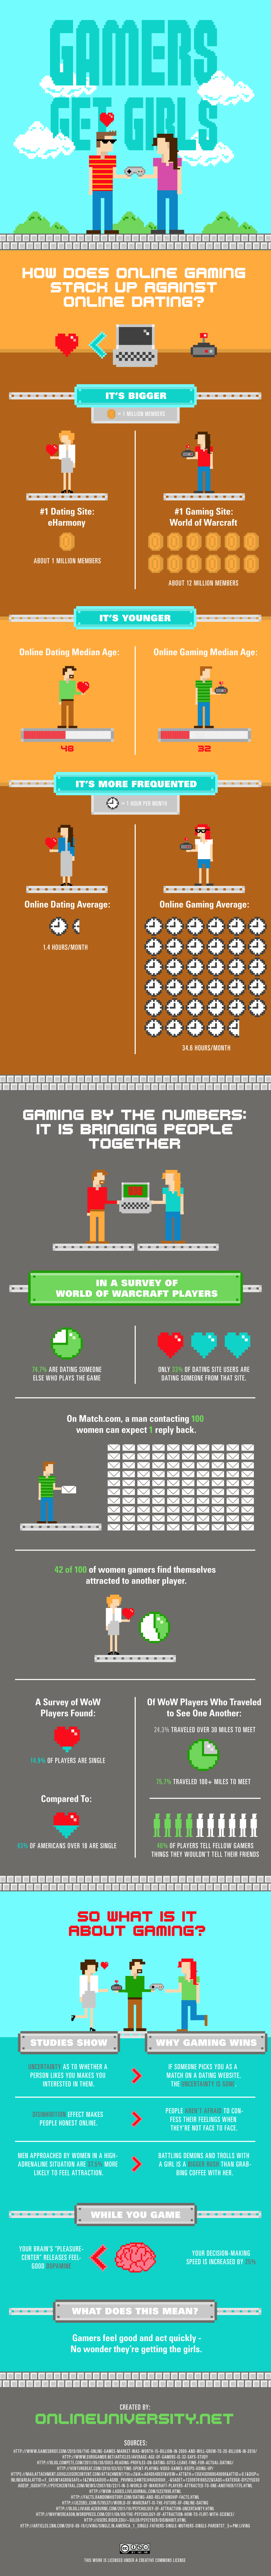 Women who play online games have more sex (Infographic)